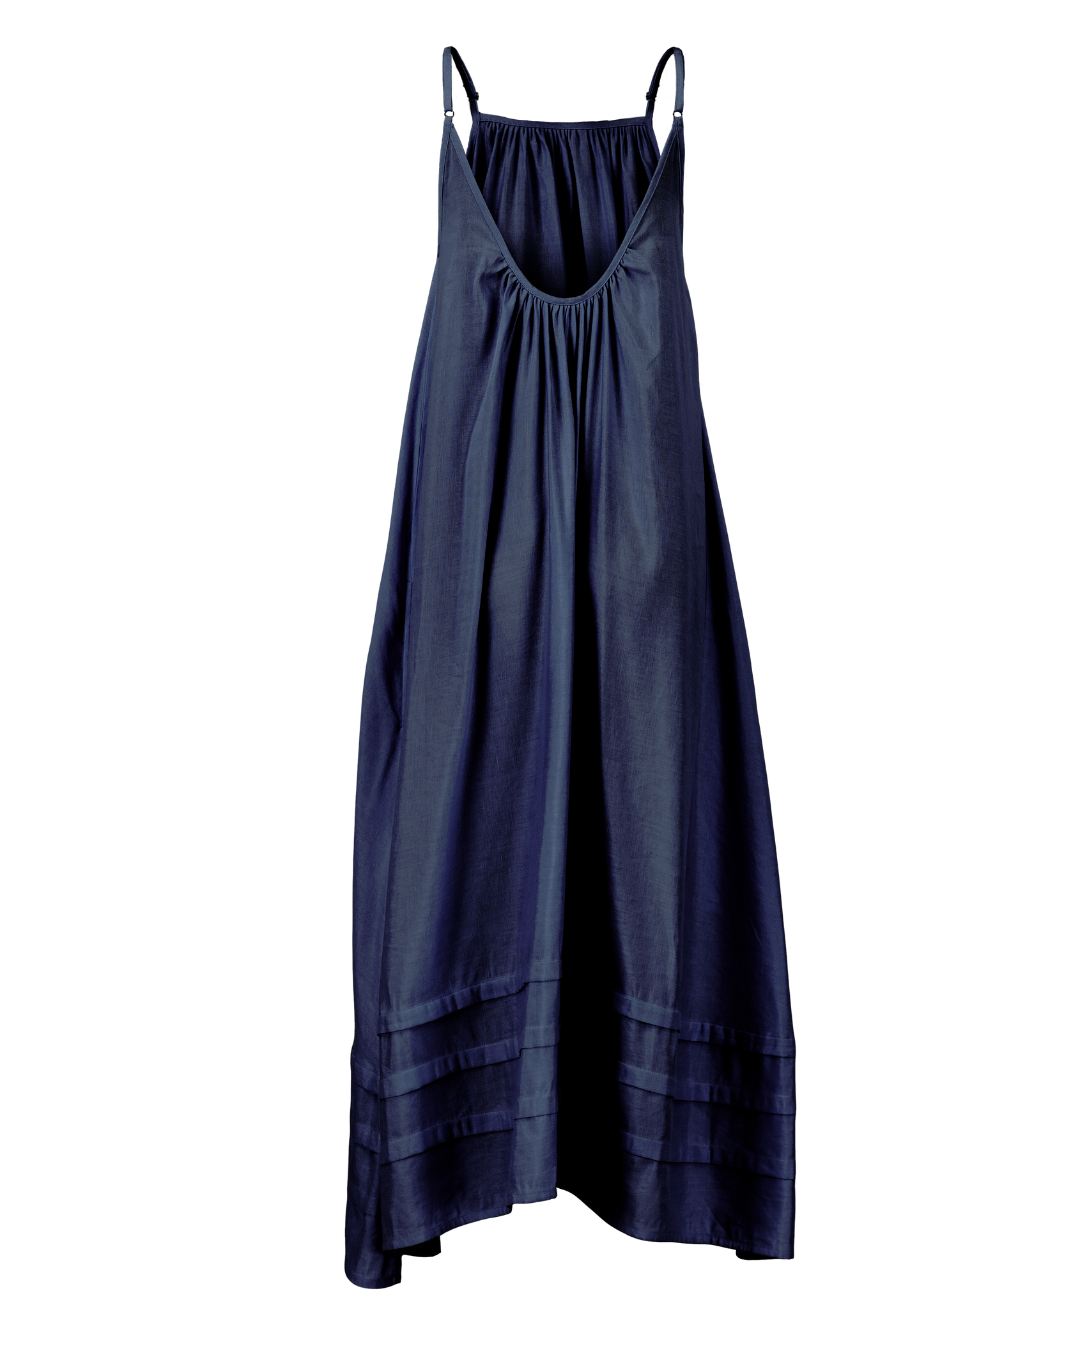 Pleated A-Line Maxi Tank Dress in Navy